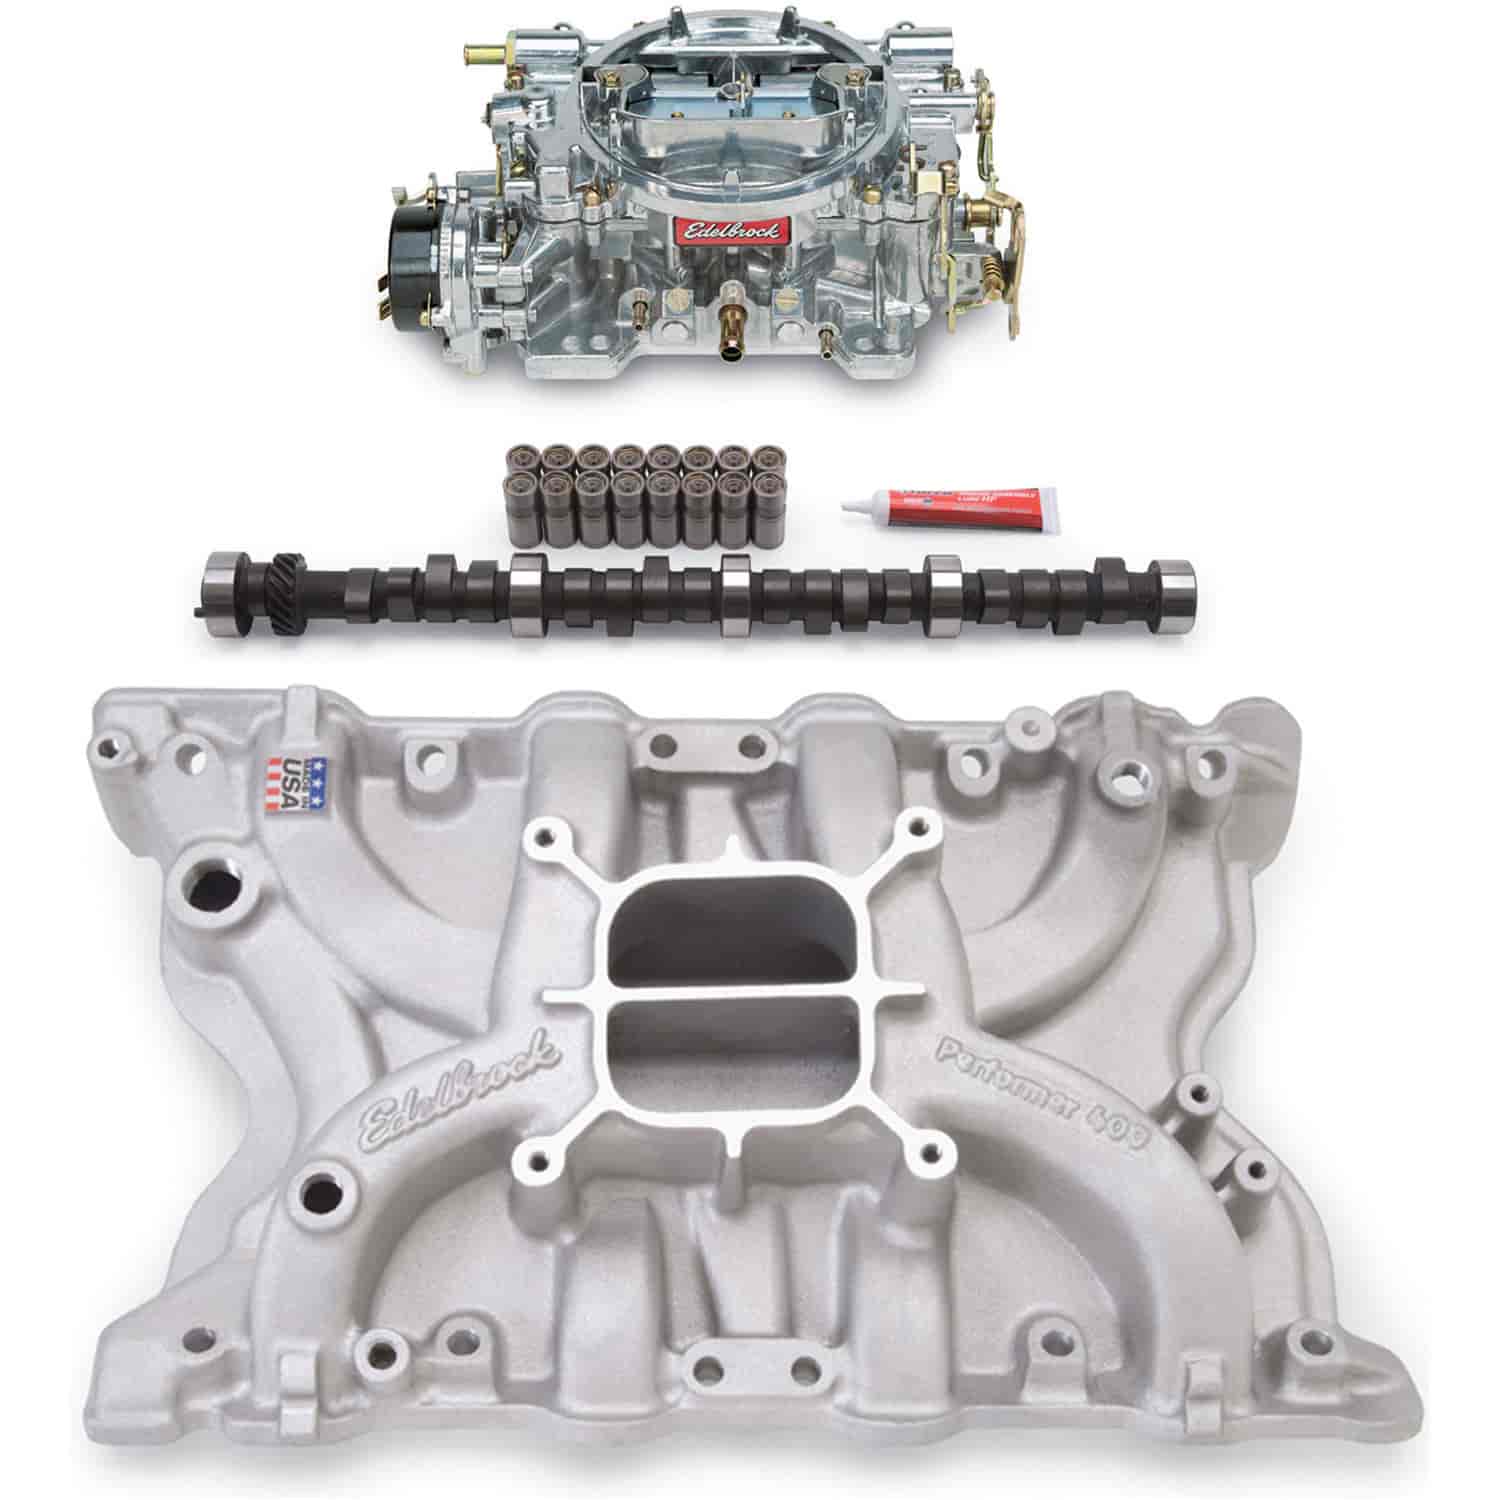 Ford Modified 351M-400ci Performer Power Package Kit